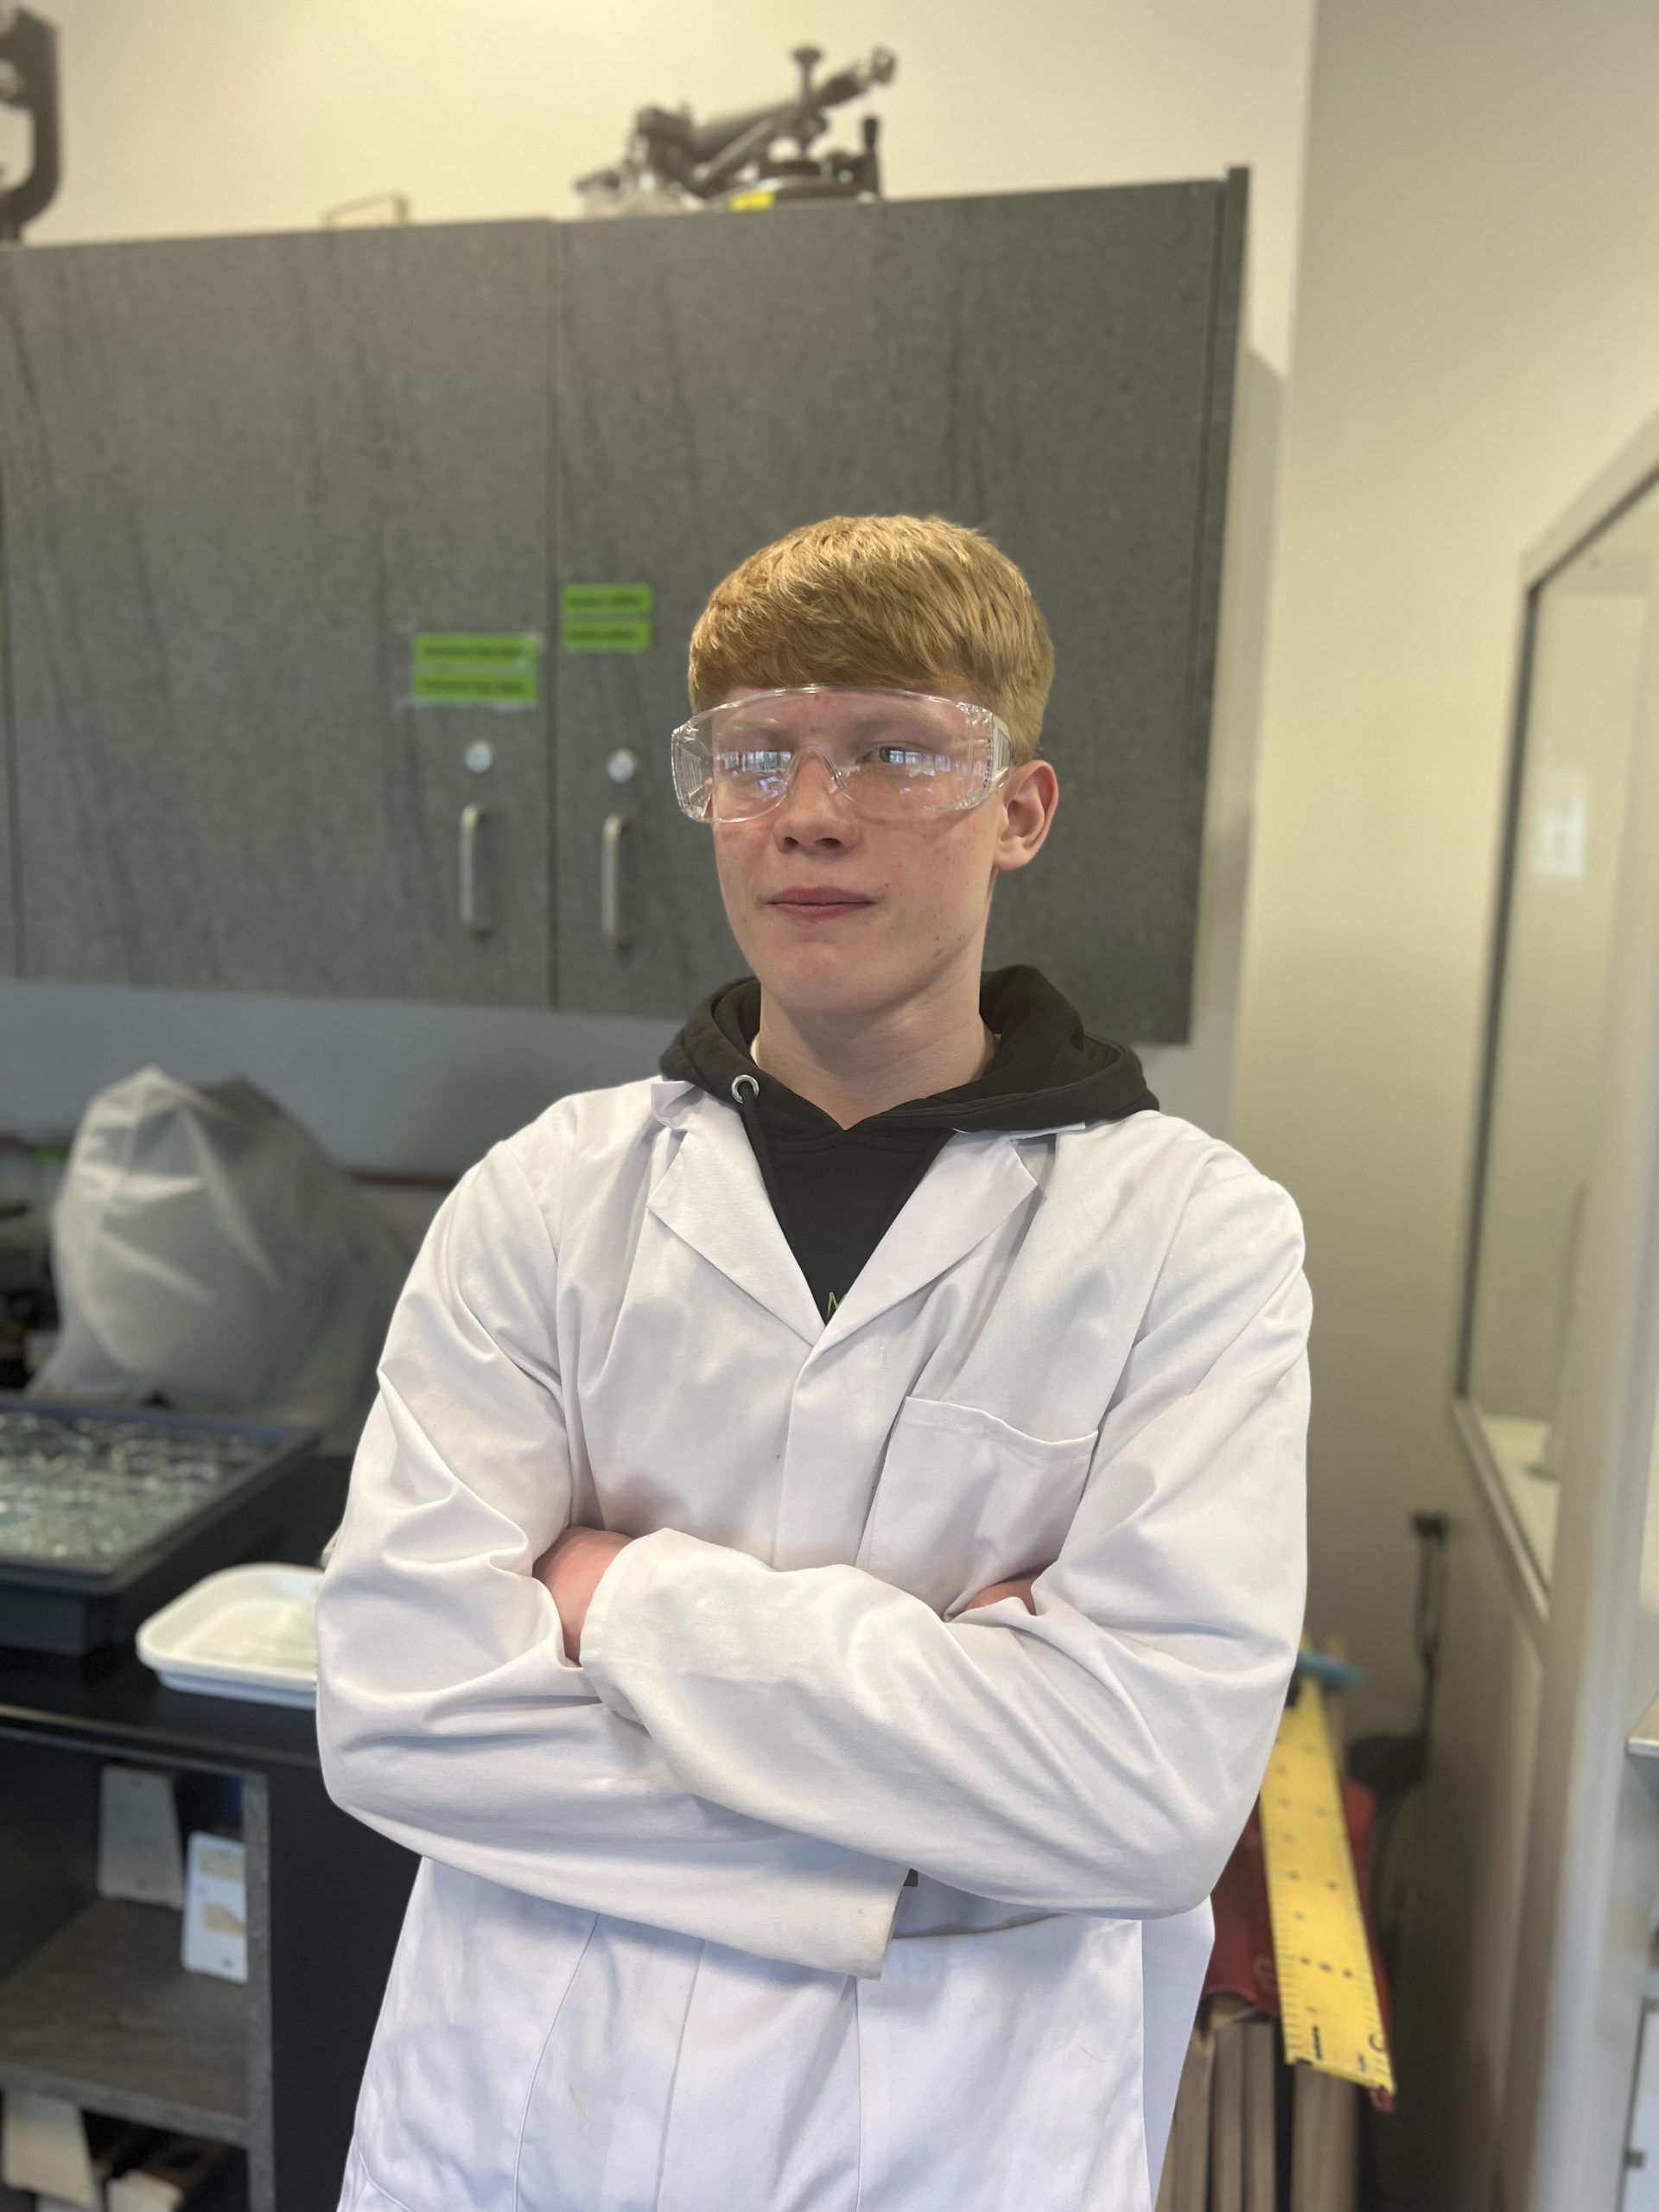 A young man stands in a lab wearing a lab coat and protective goggles.